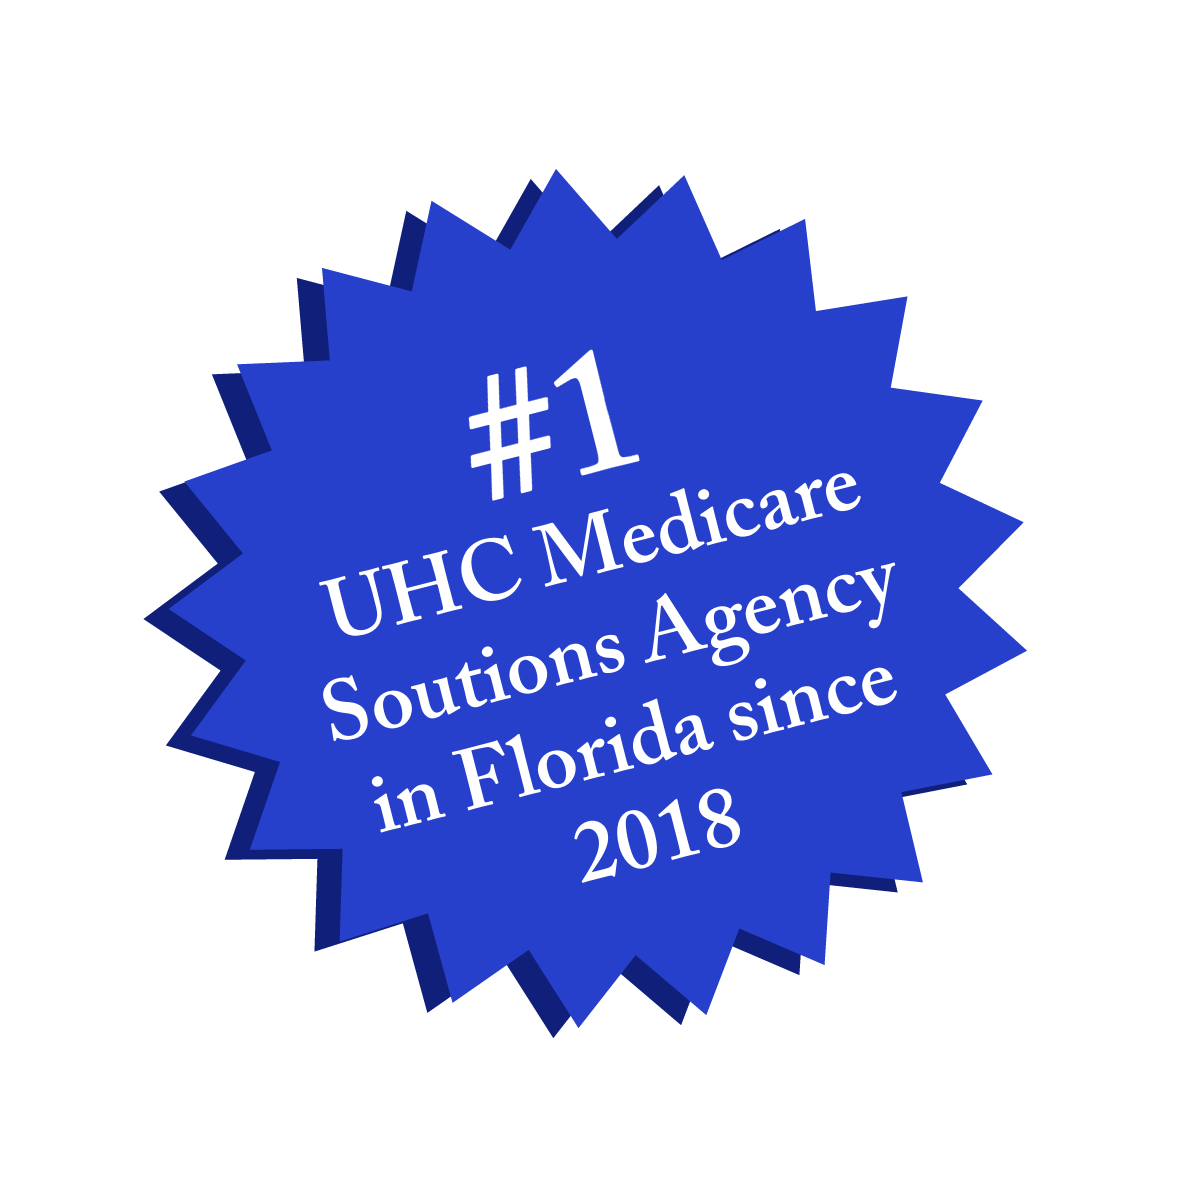 Number One United Healthcare Solutions Agency in Florida Since 2018